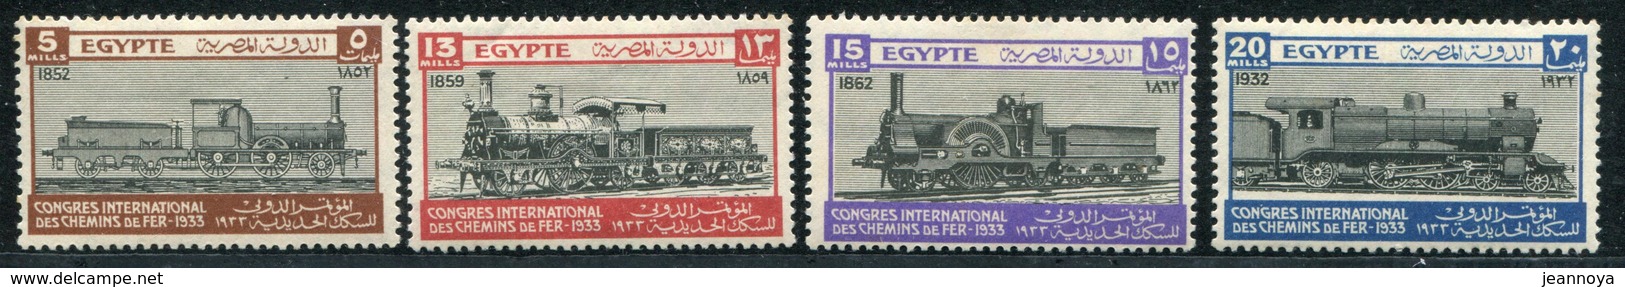 EGYPTE - N° 146 A 149, LOCOMOTIVES - 1ére CHARNIÉRE - TB - Unused Stamps